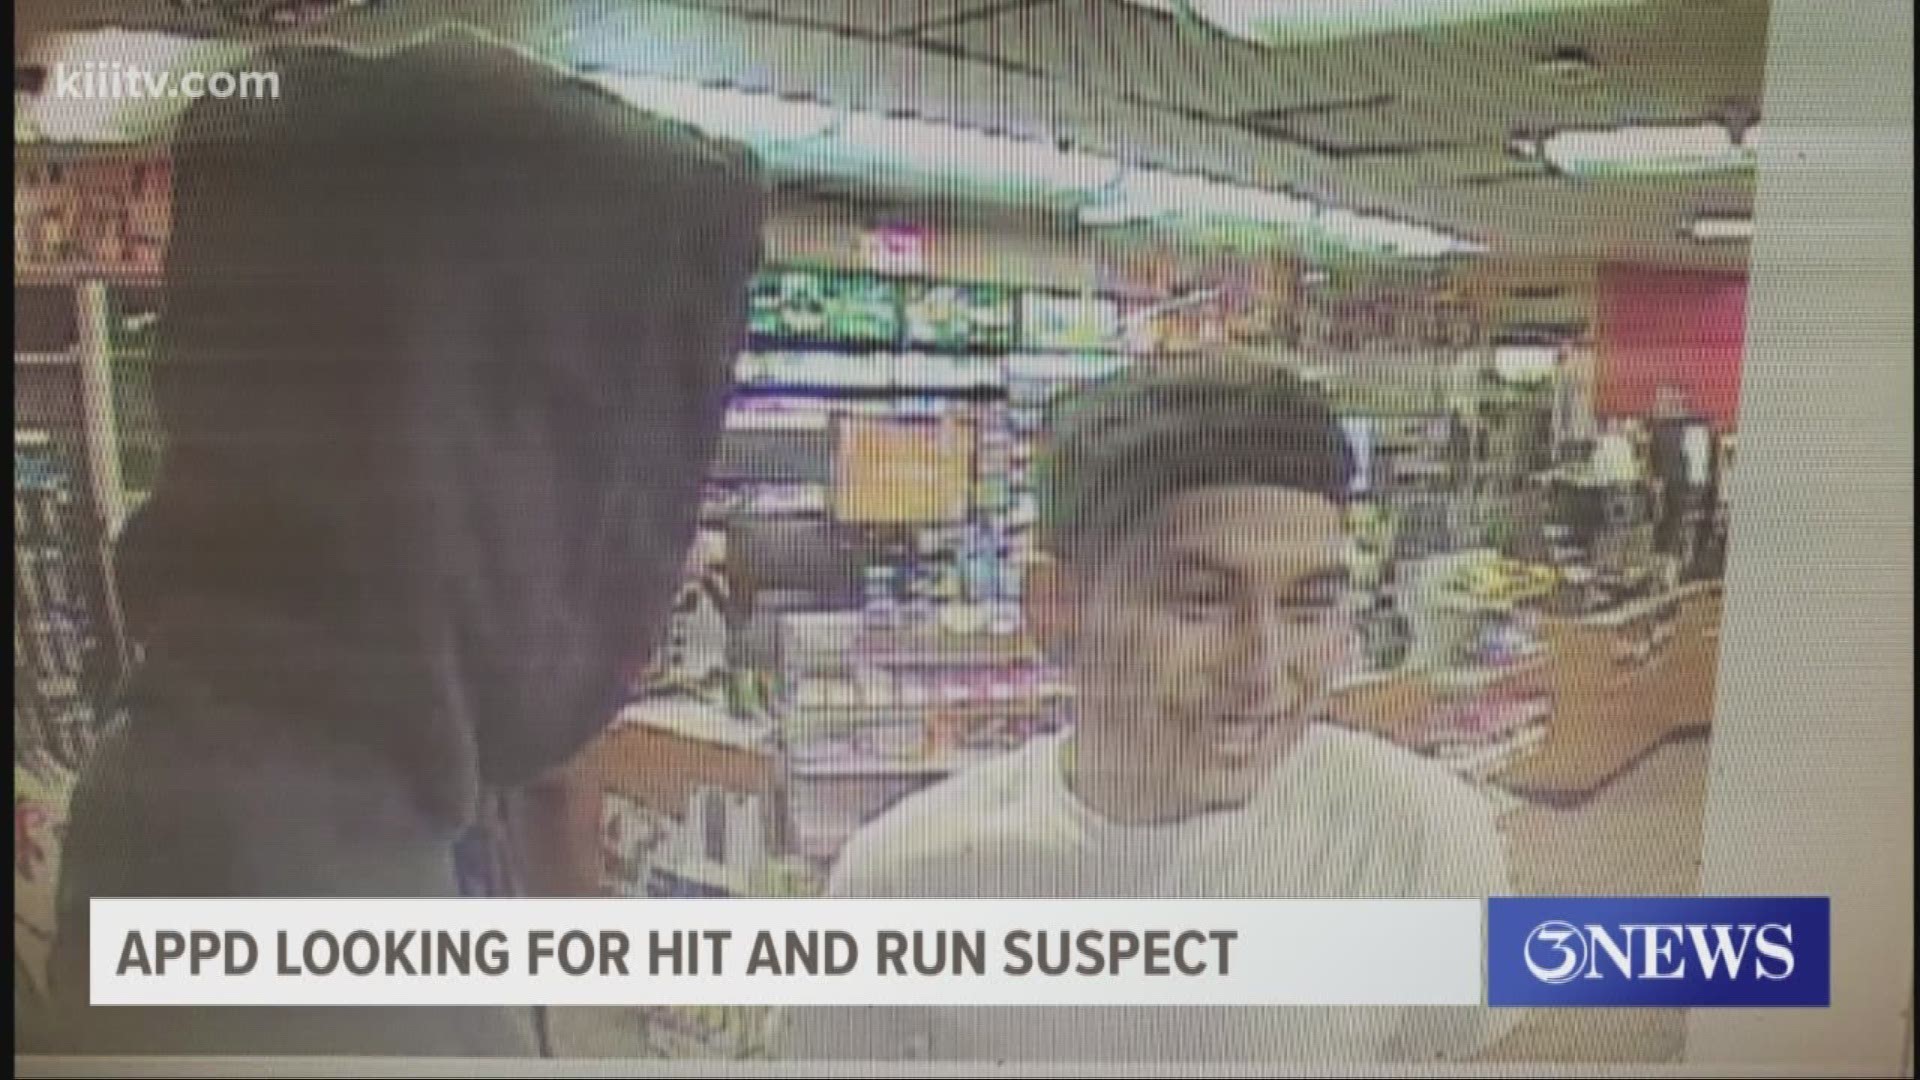 Last month a hit and run took place at a Valero on West Wheeler and 12th Street.